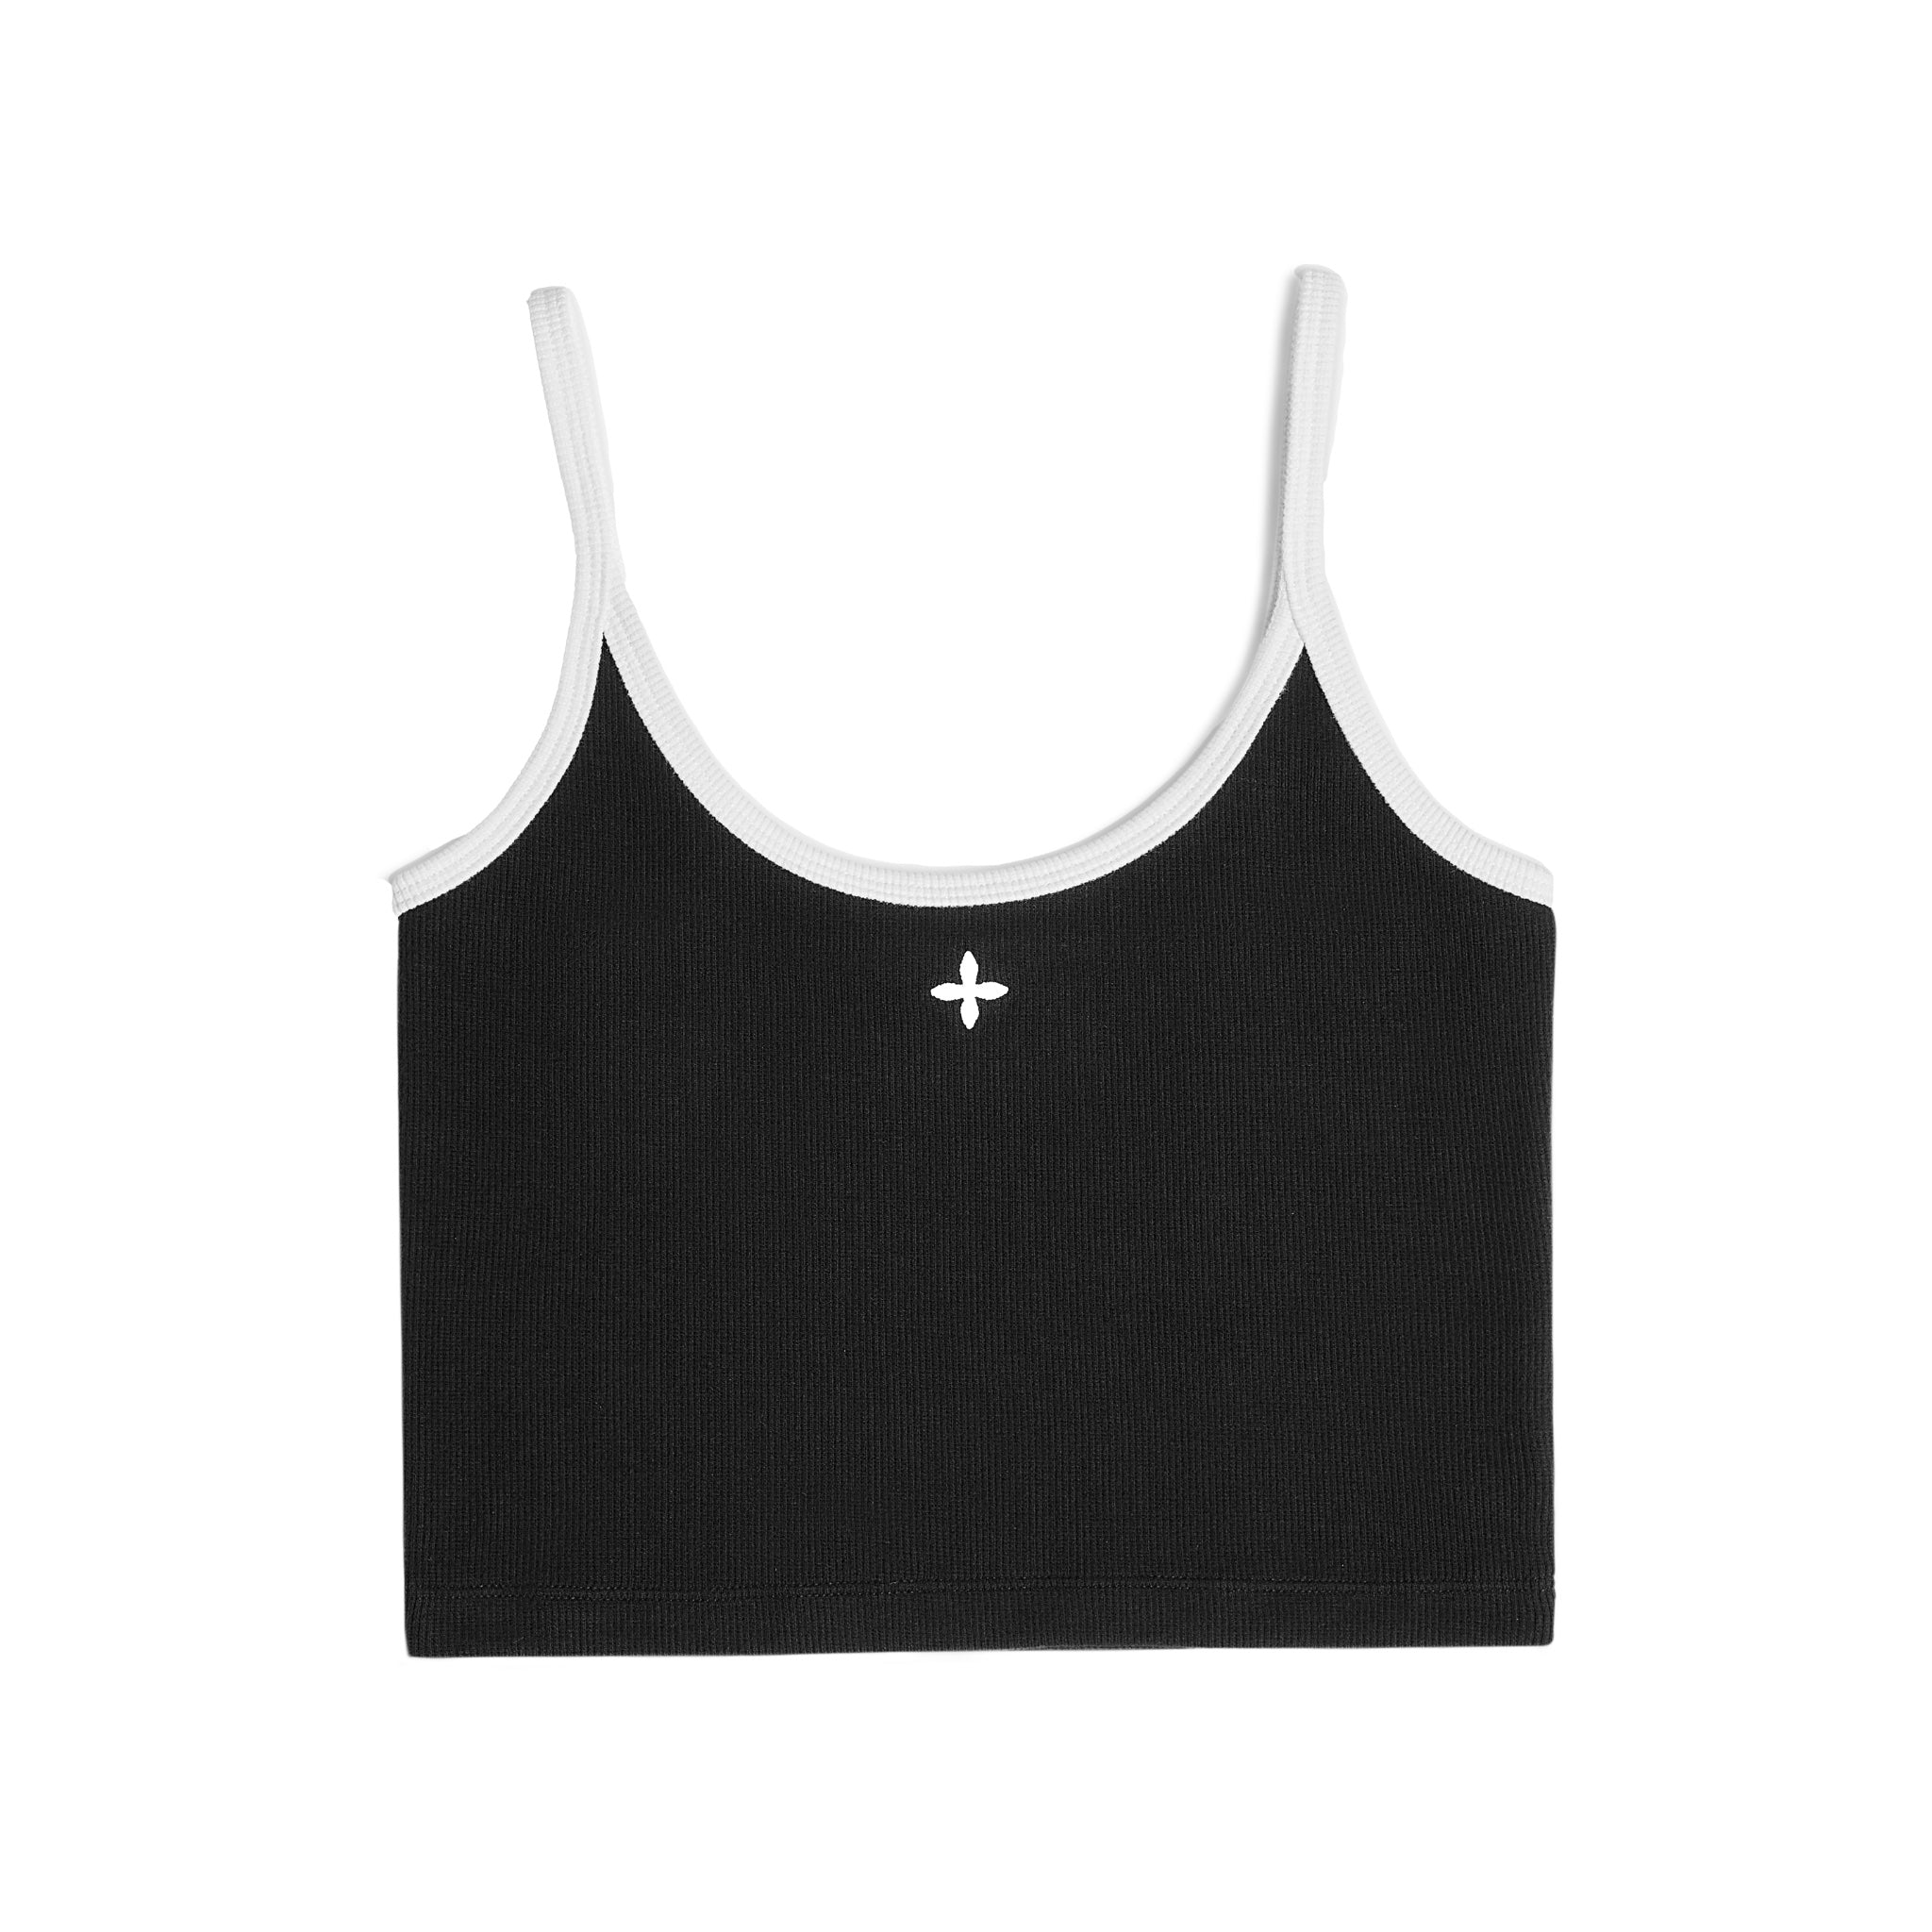 SMFK Compass Cross Flower Vintage Tank Top Black And White